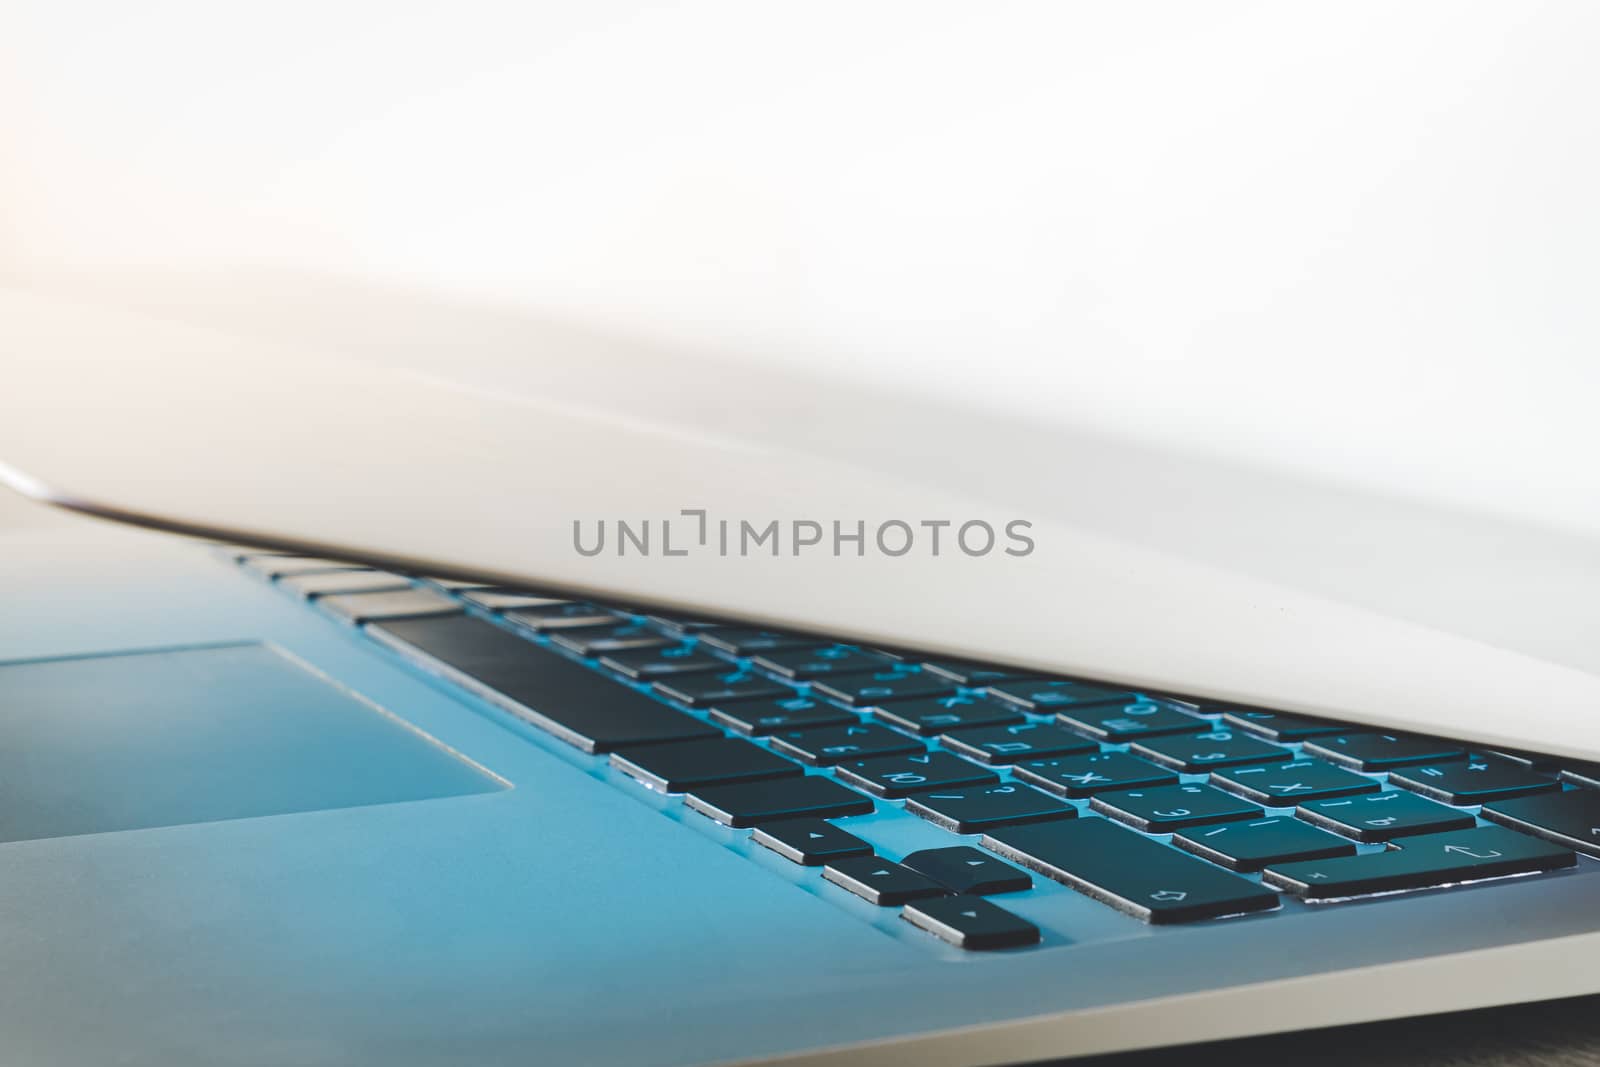 Laptop with a closed lid, close-up view by photoboyko